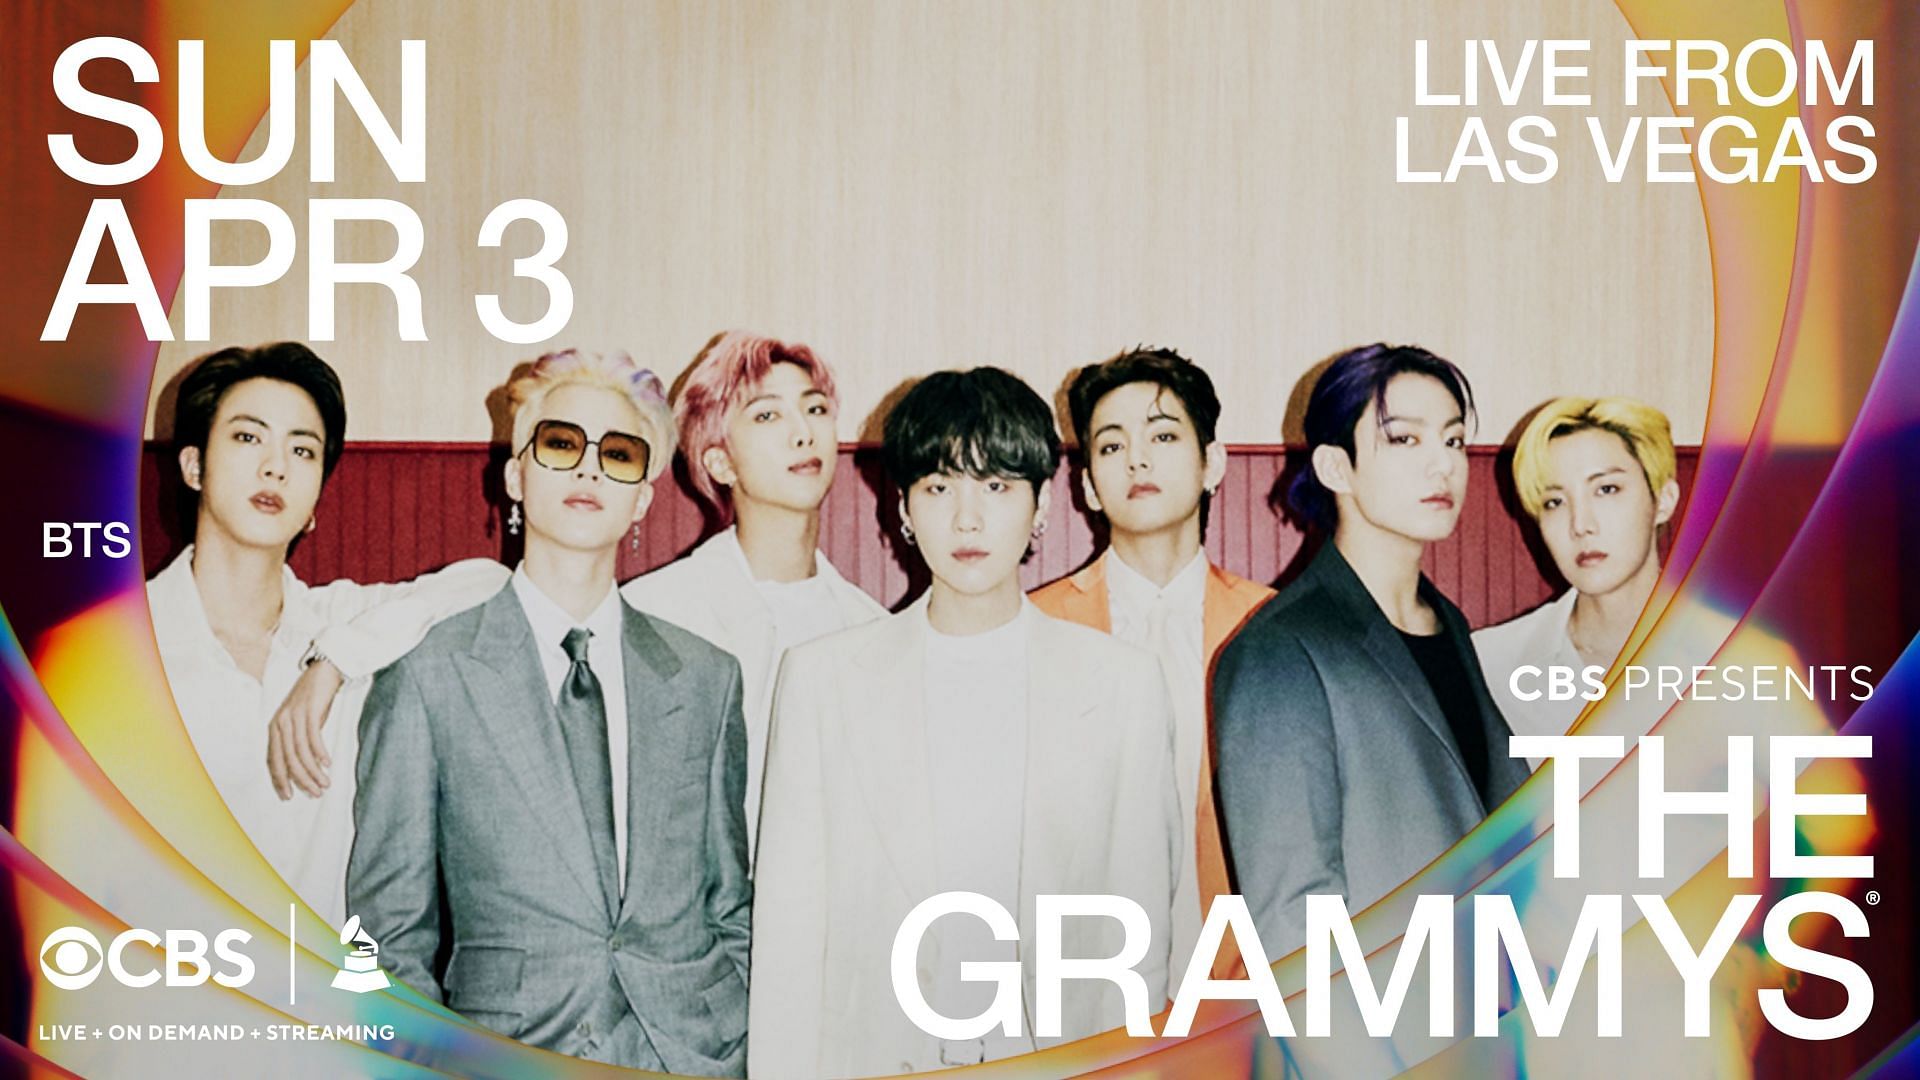 BTS will take to the stage (image via GRAMMYs official Twitter)